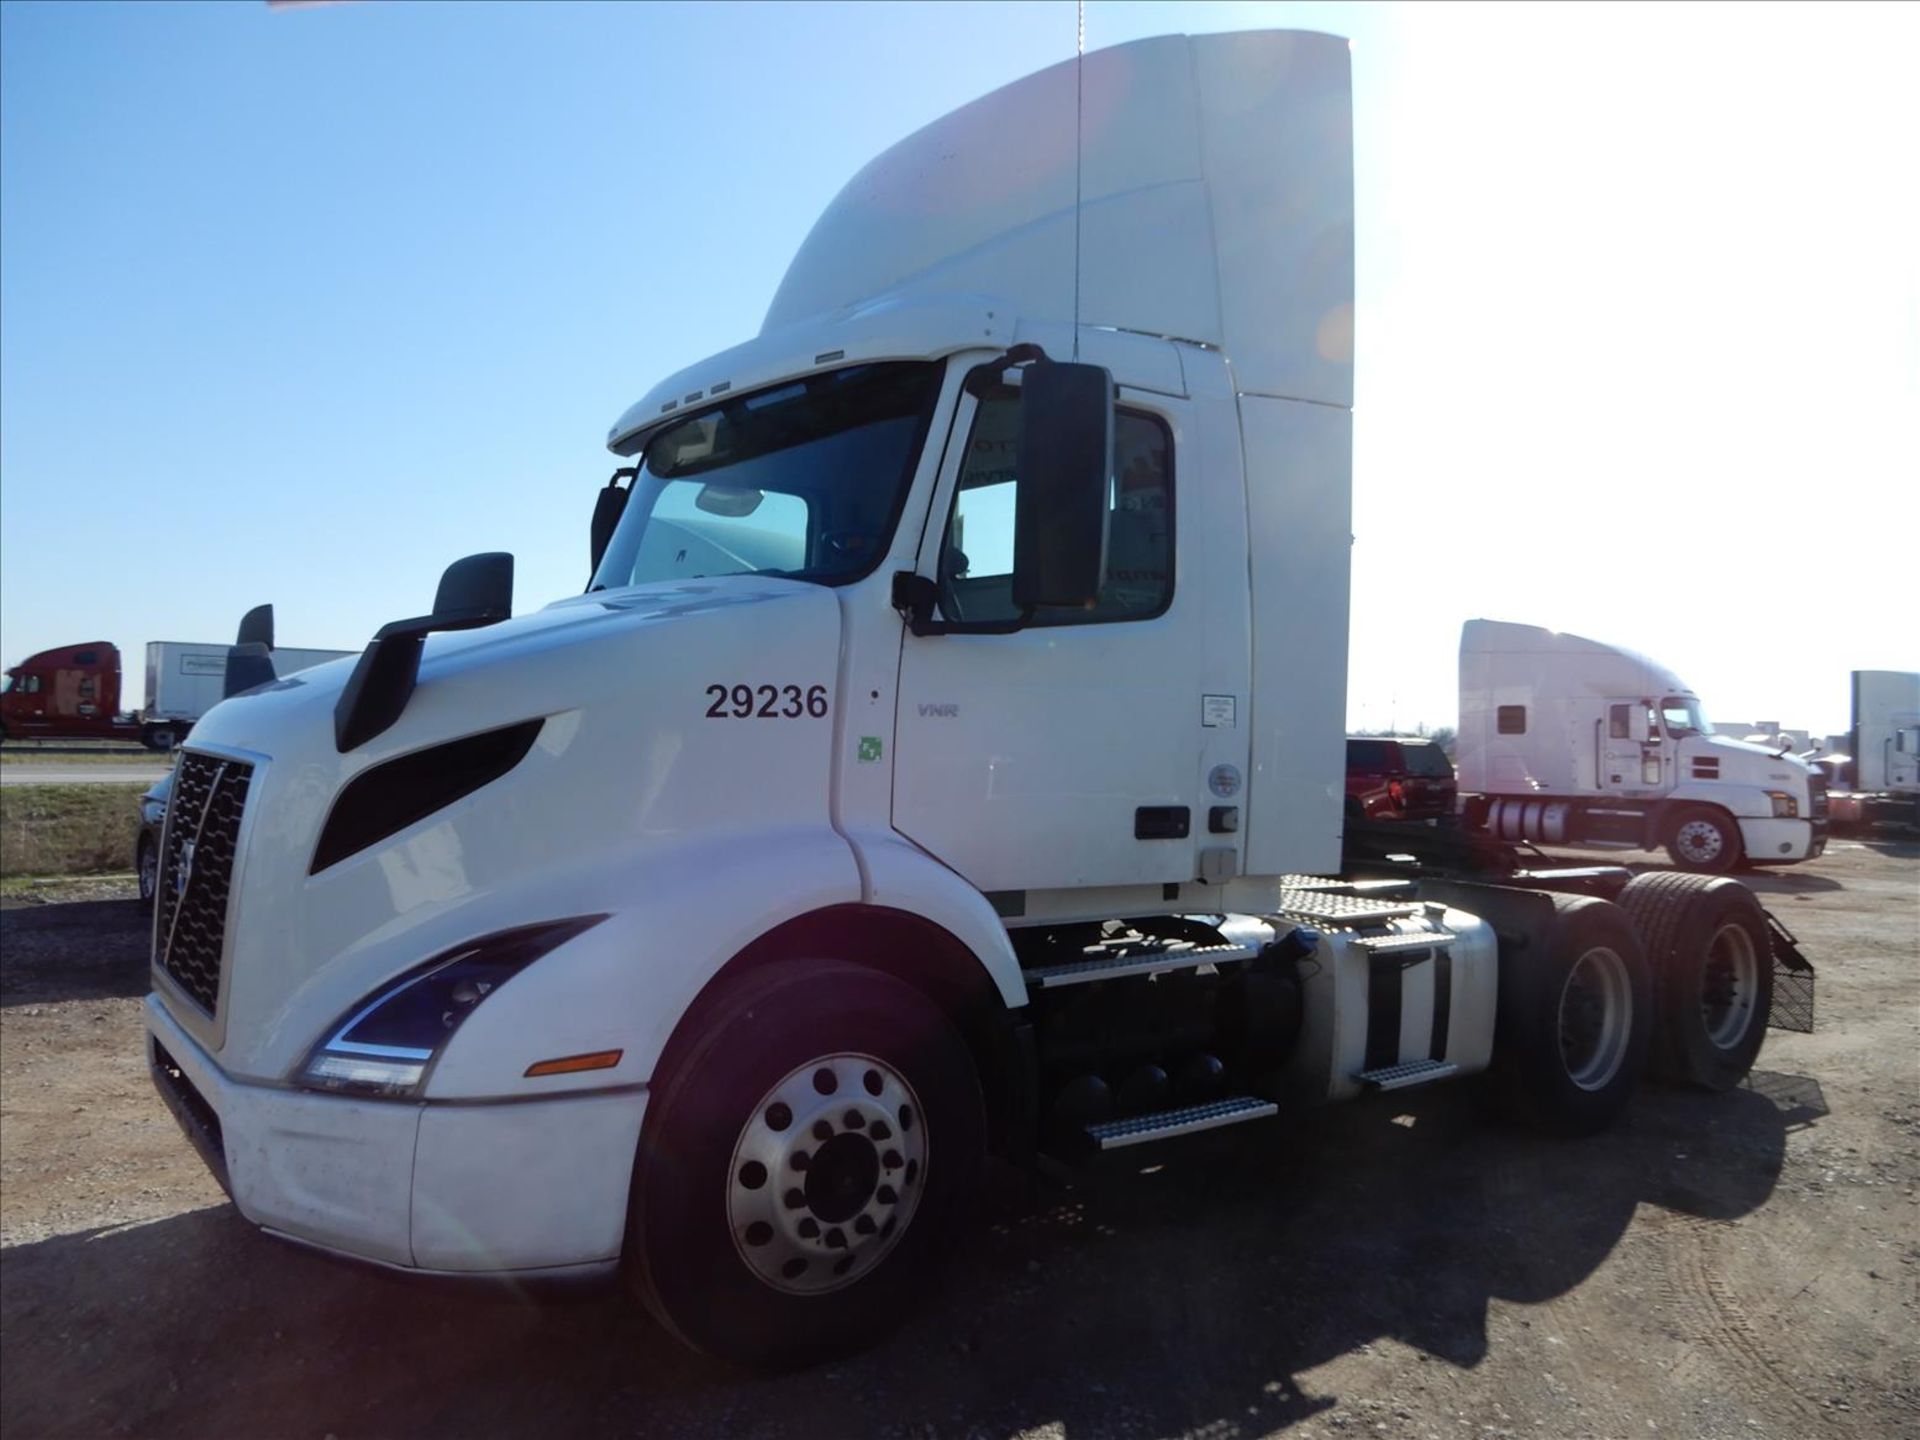 2019 Volvo VNR 300 Daycab Truck Tractor - Located in Indianapolis, IN